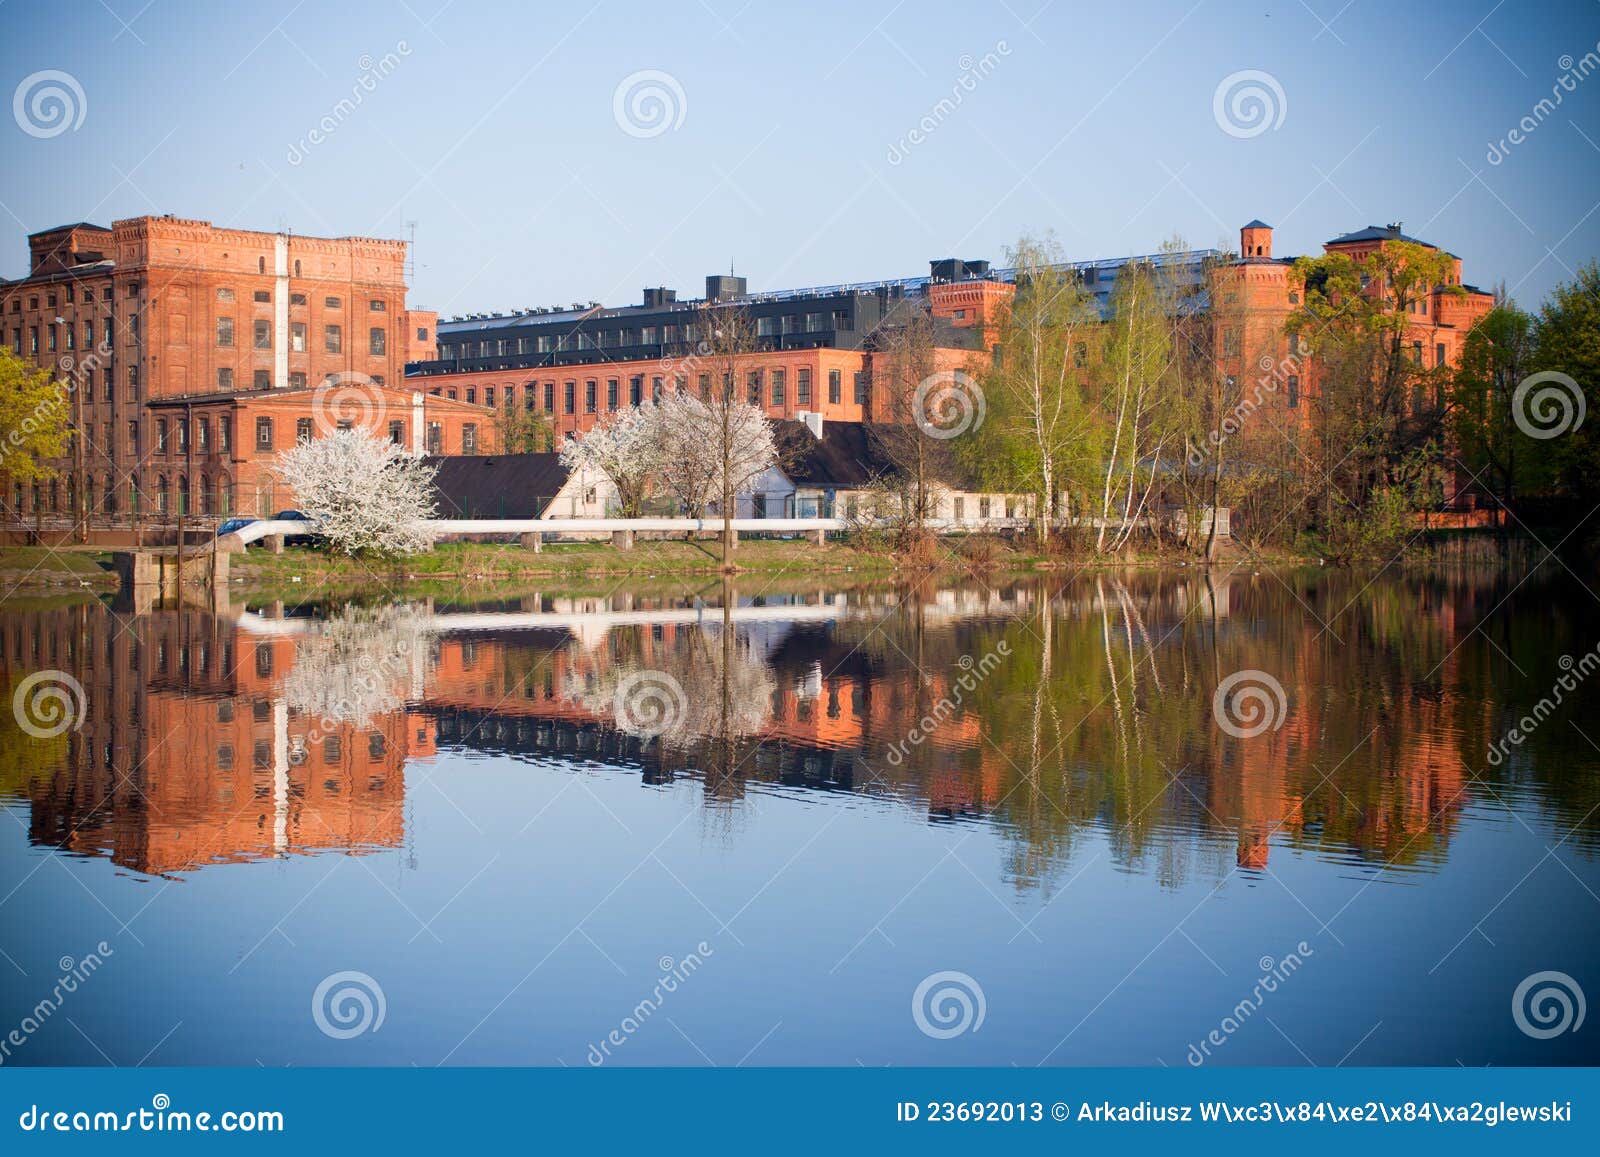 old factory in lodz poland